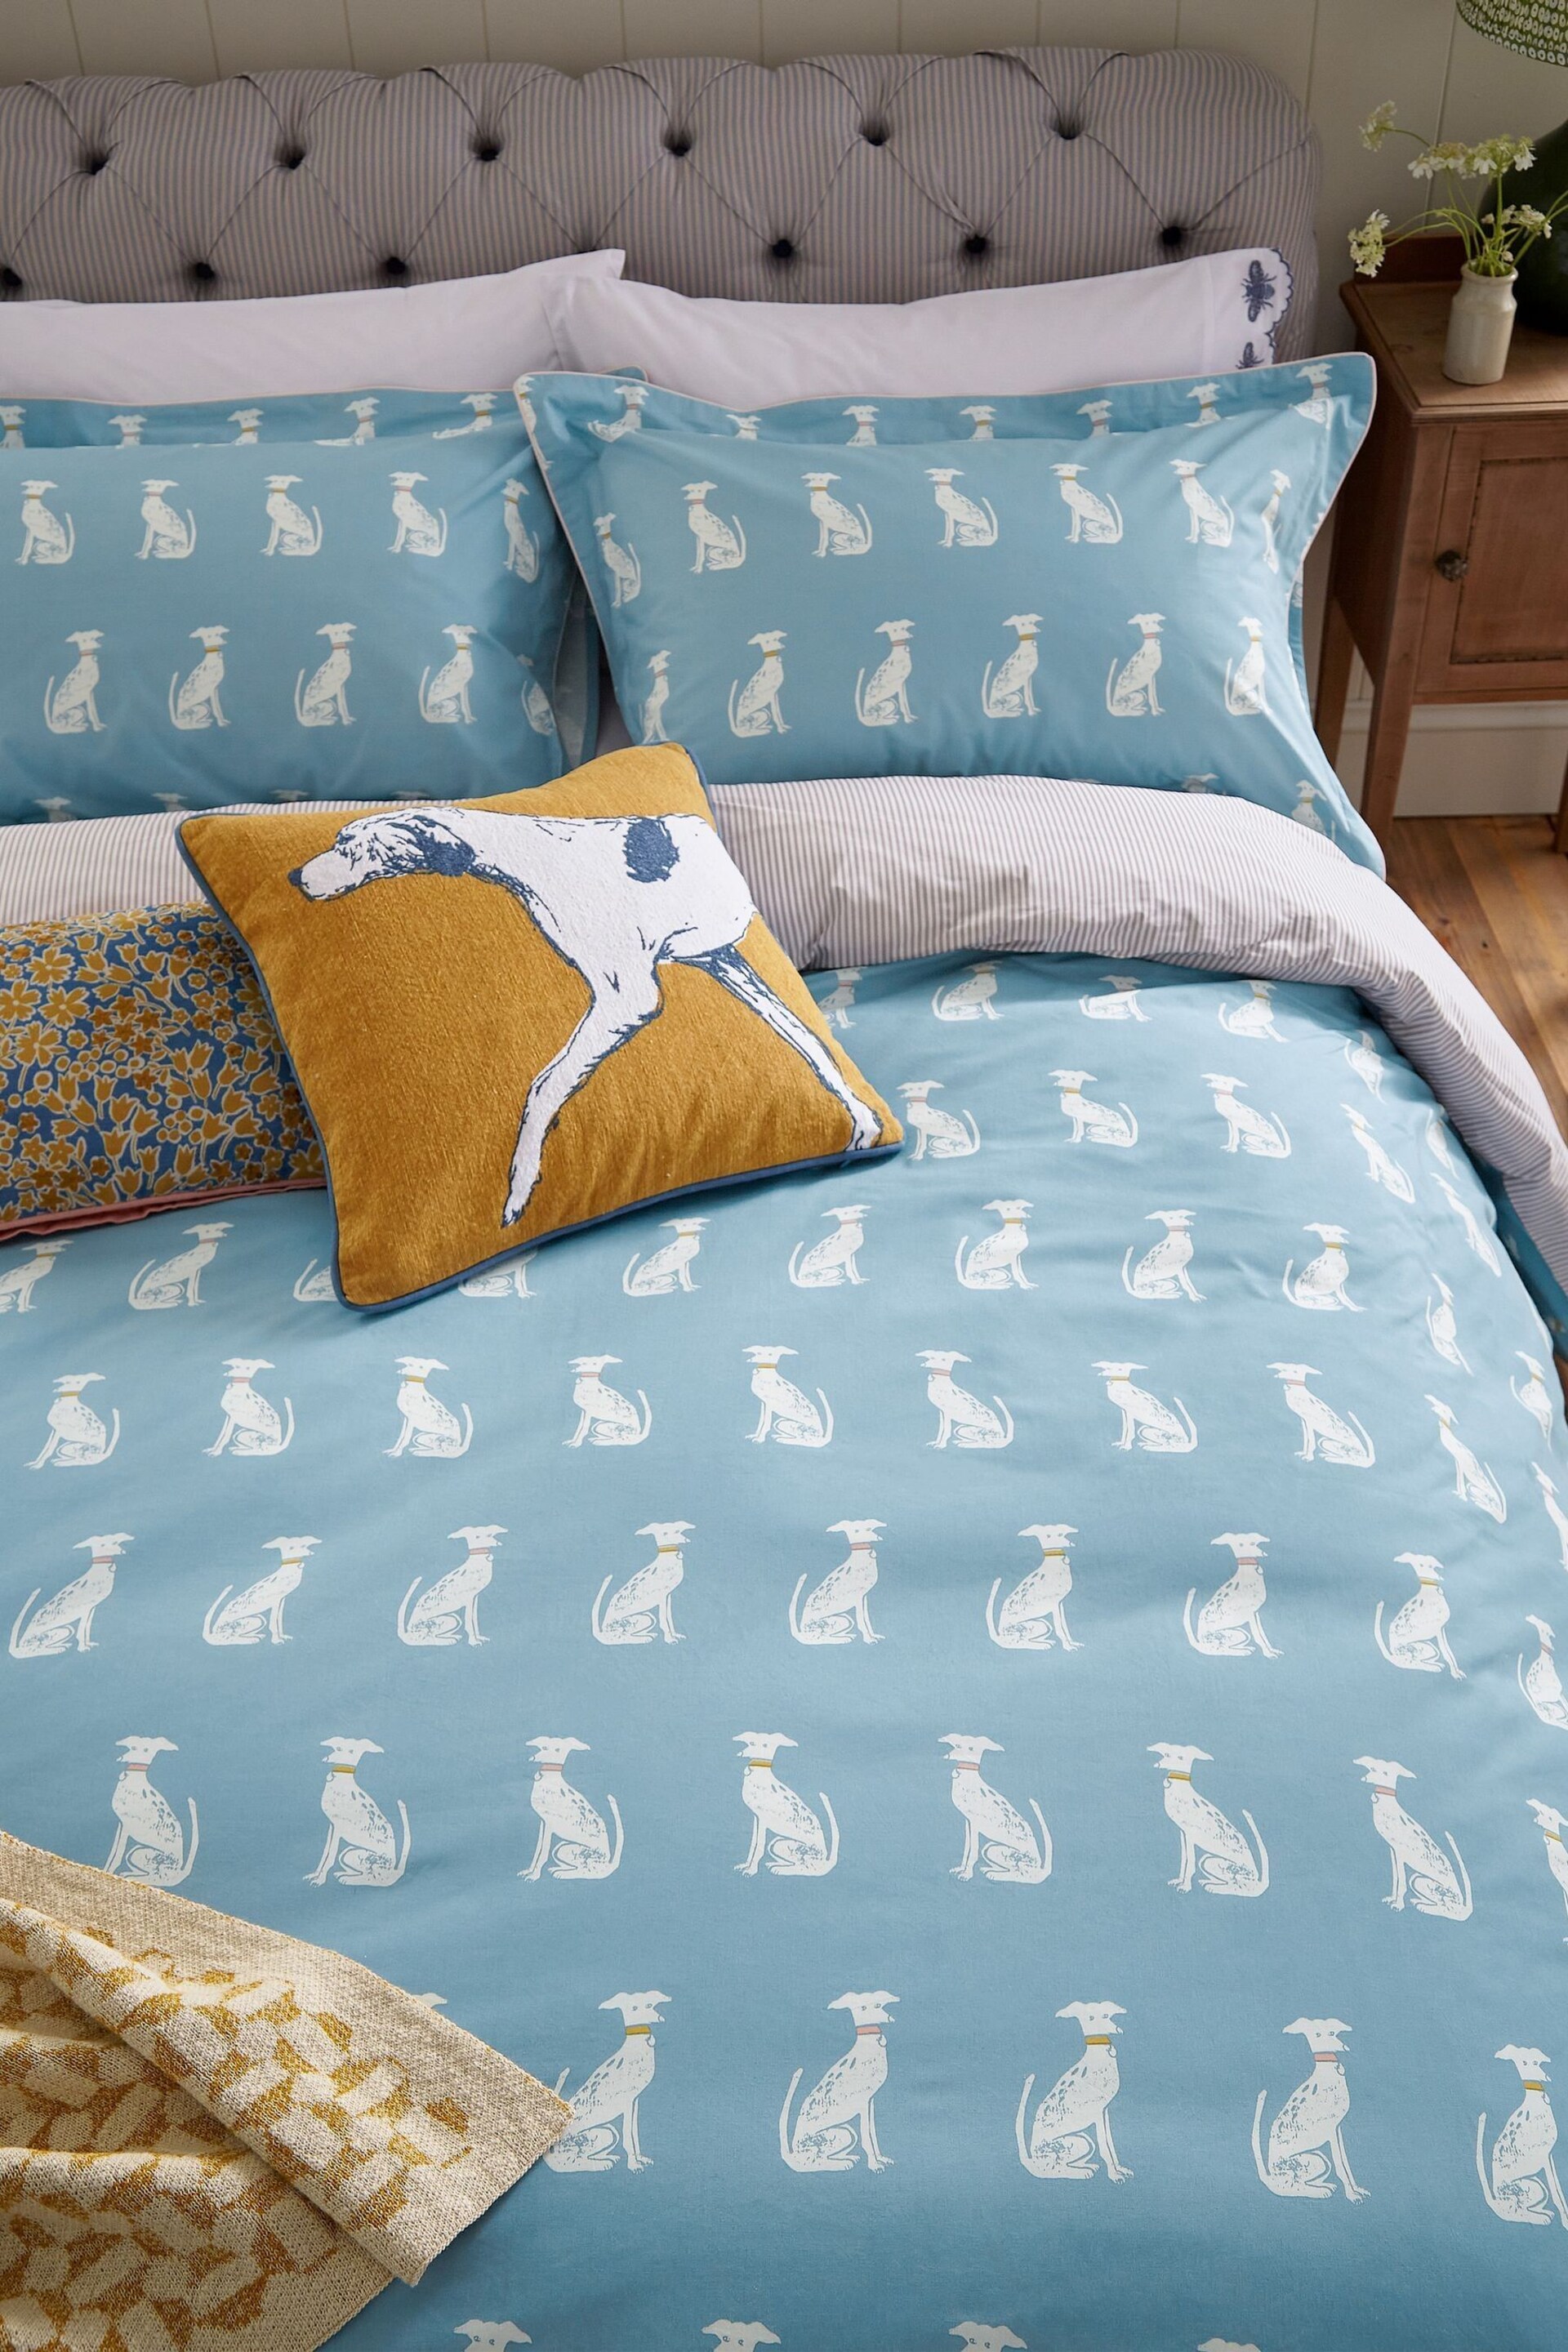 Joules Blue Blockprint Dogs Duvet Cover and Pillowcase Set - Image 3 of 5